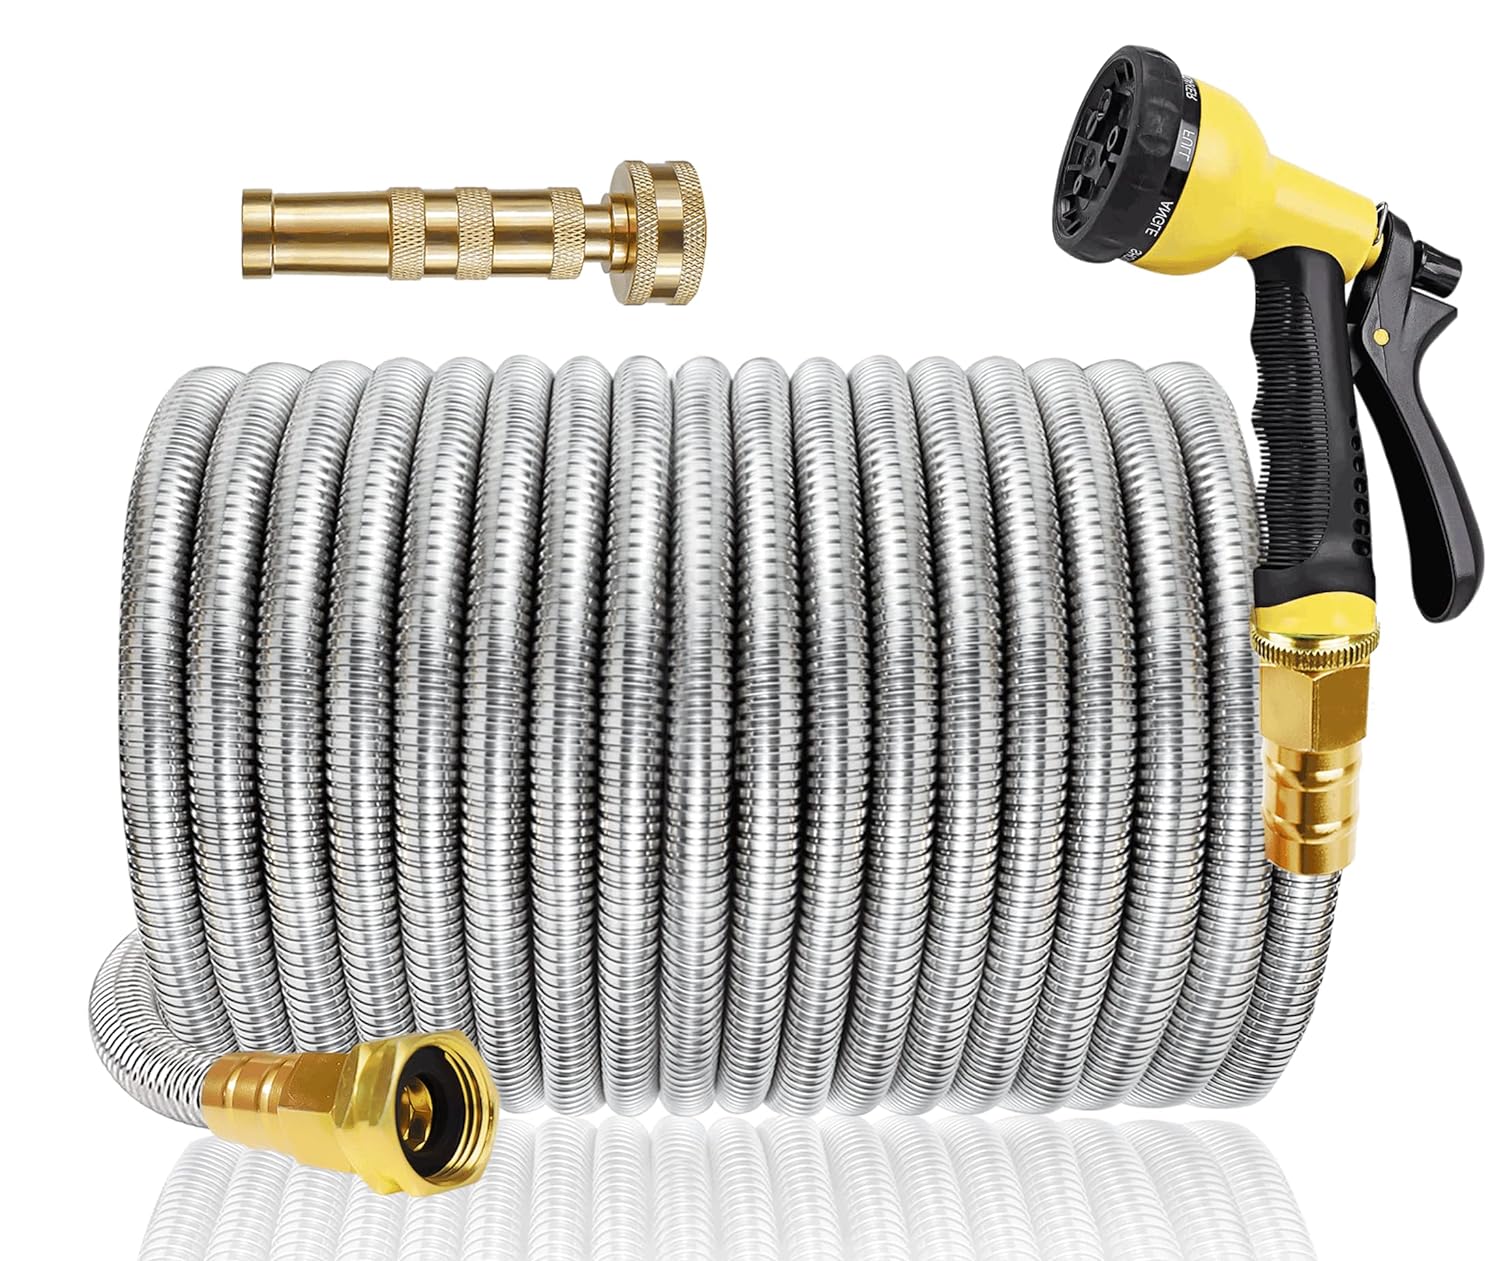 Metal Garden Hose 304 Stainless Steel Water Hose Heavy Duty Water Hose with Metal Nozzle & 8 Function Sprayer, Portable & Lightweight Kink Free Yard Hose, Outdoor 100FT Hose